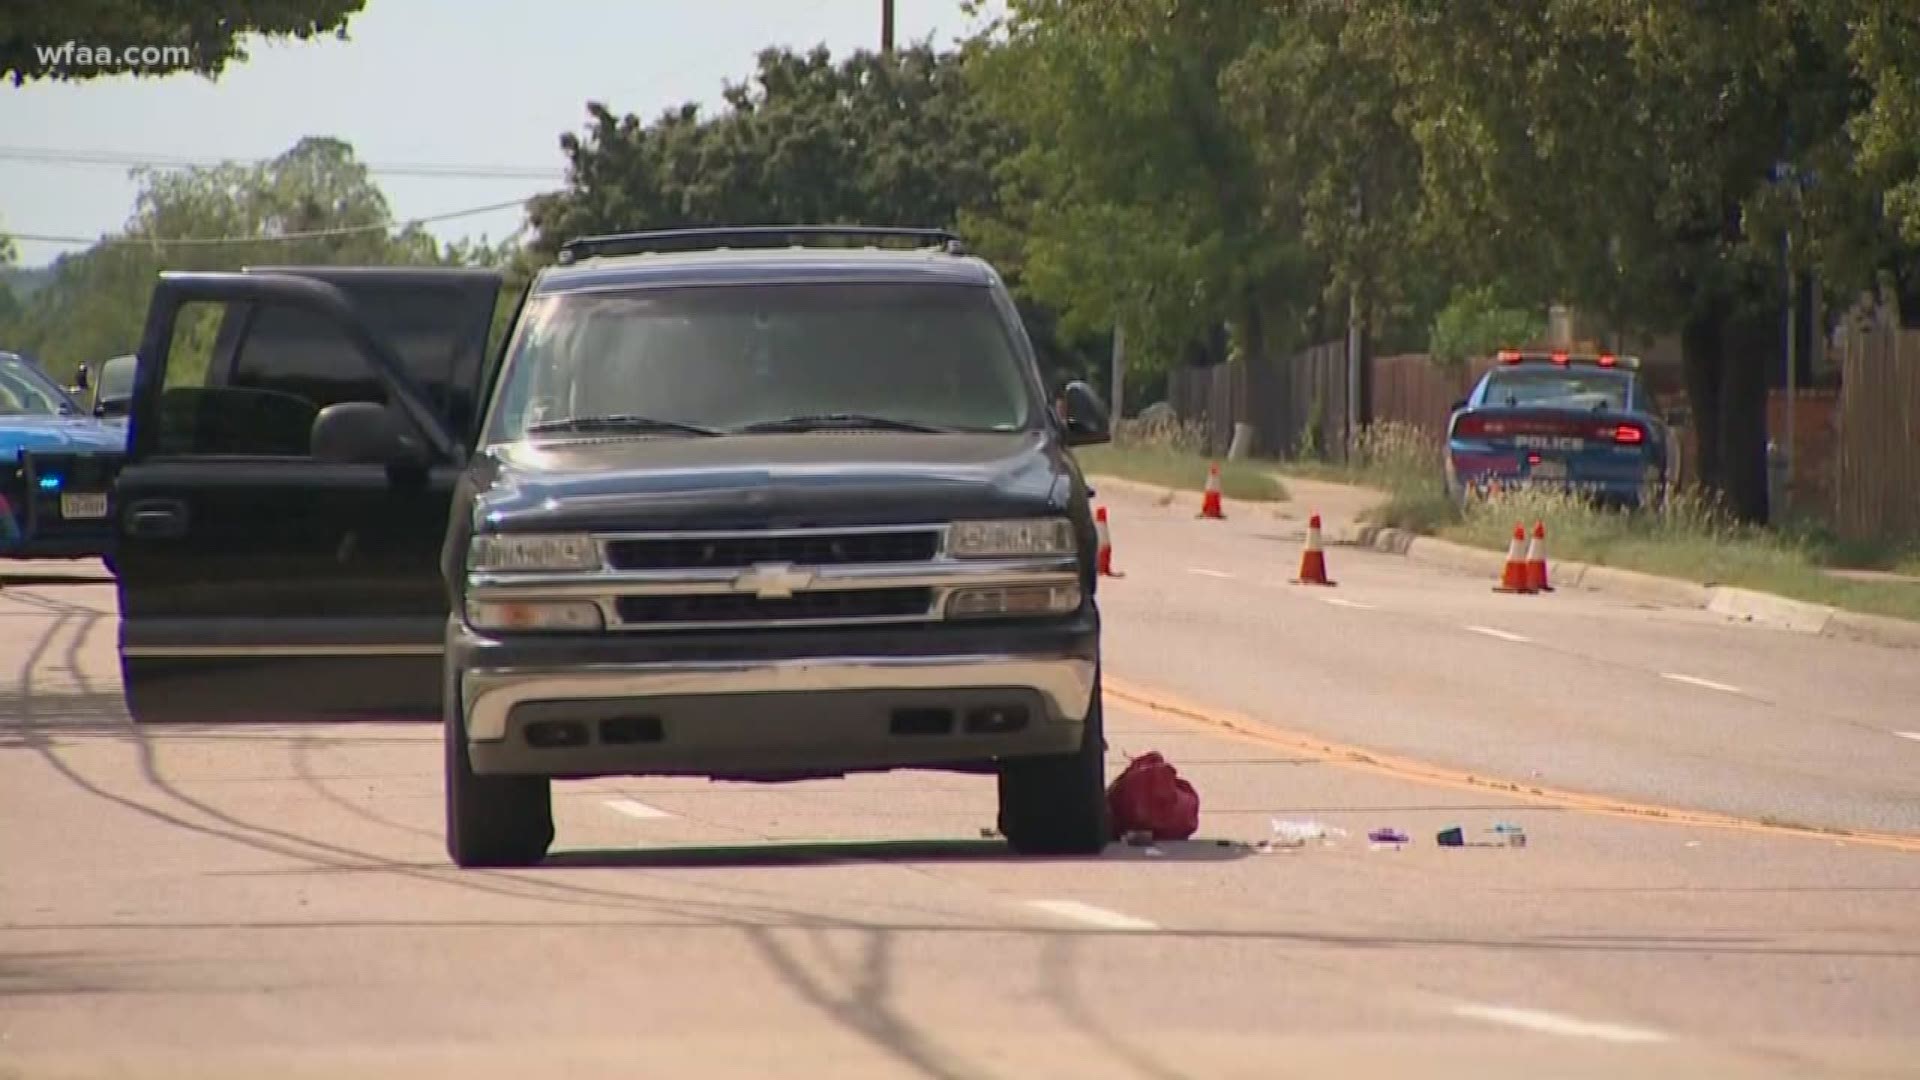 The driver of an SUV was fatally shot during a traffic stop, police said.